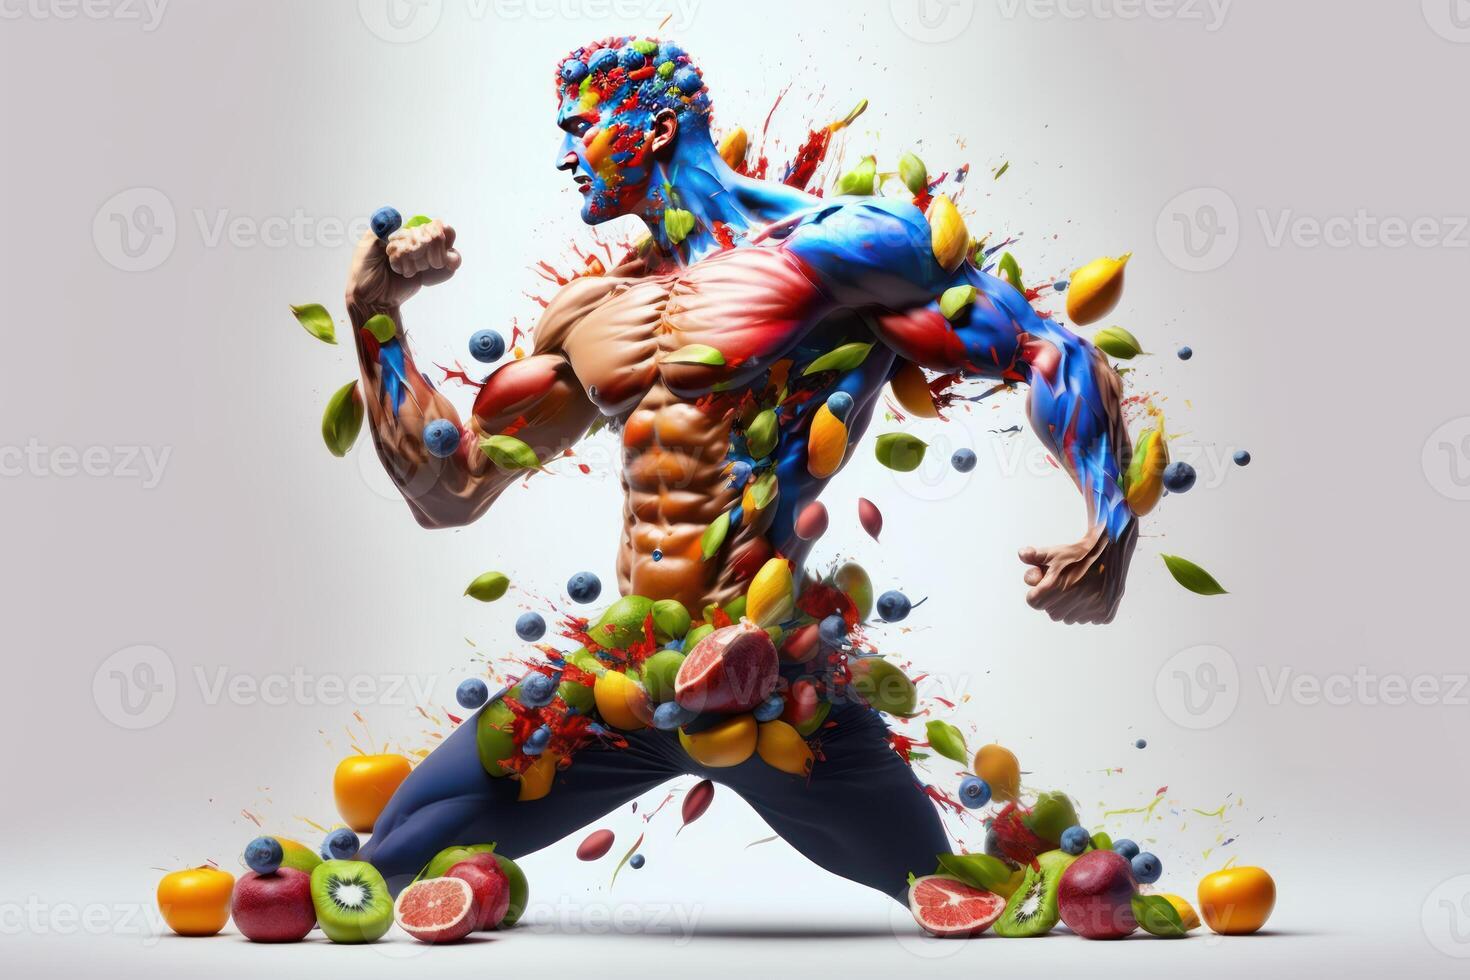 Fruits forming a strong body, Man posing muscular body builder, Eating Diet Food for Digestion. photo